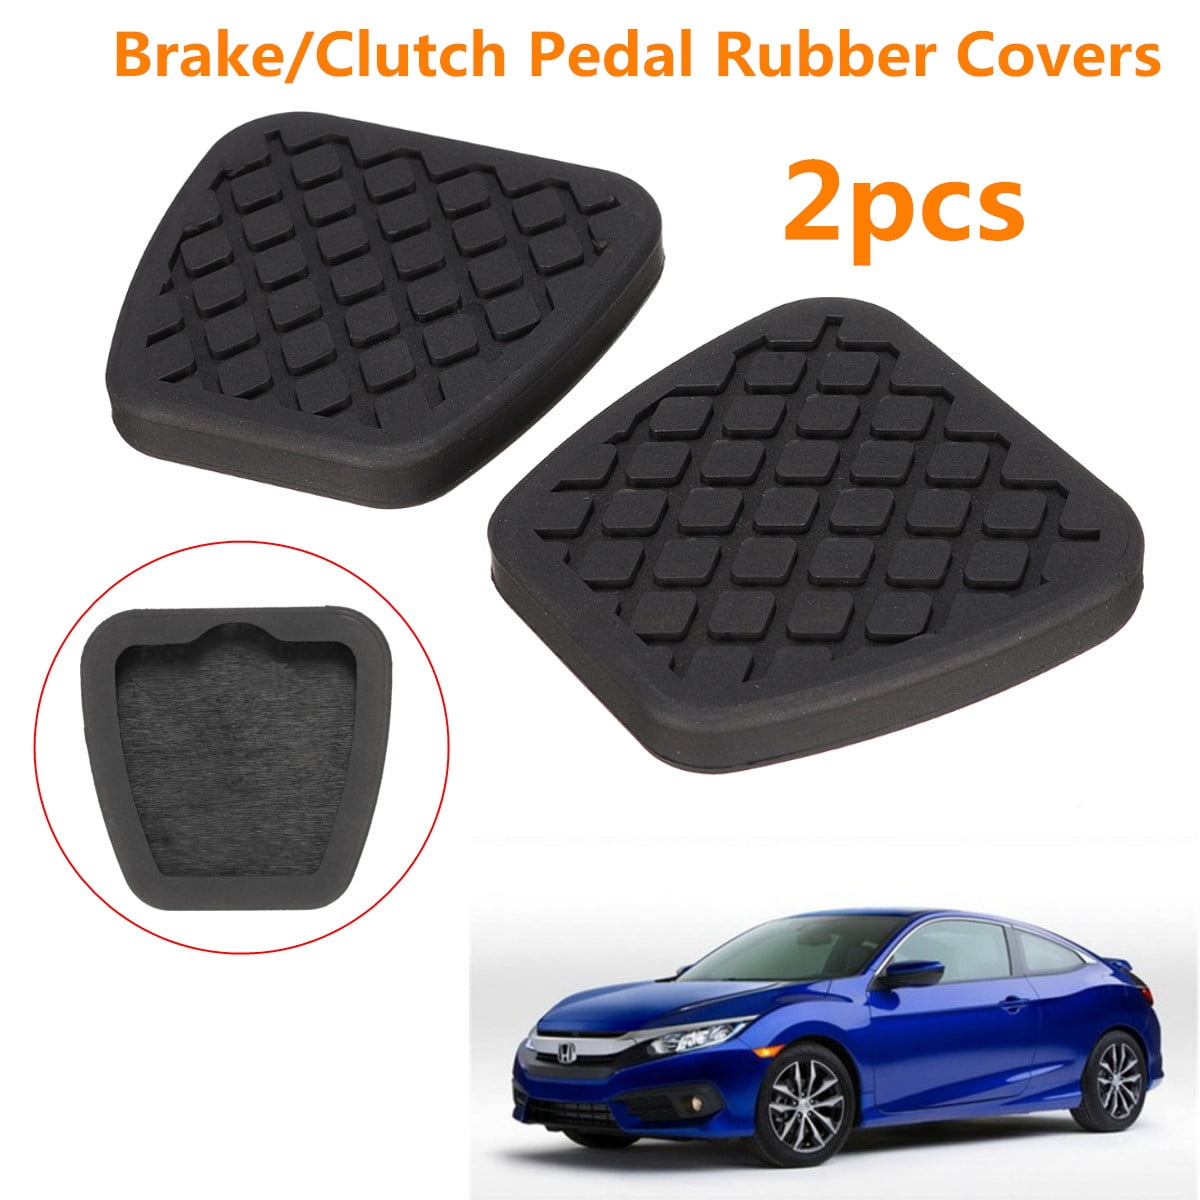 2 pieces Brake Clutch Pedal Pad Rubber Black For Honda Civic Accord CR-V Acura Kooshy Clutch Pedal and Brake Pedal Pad 